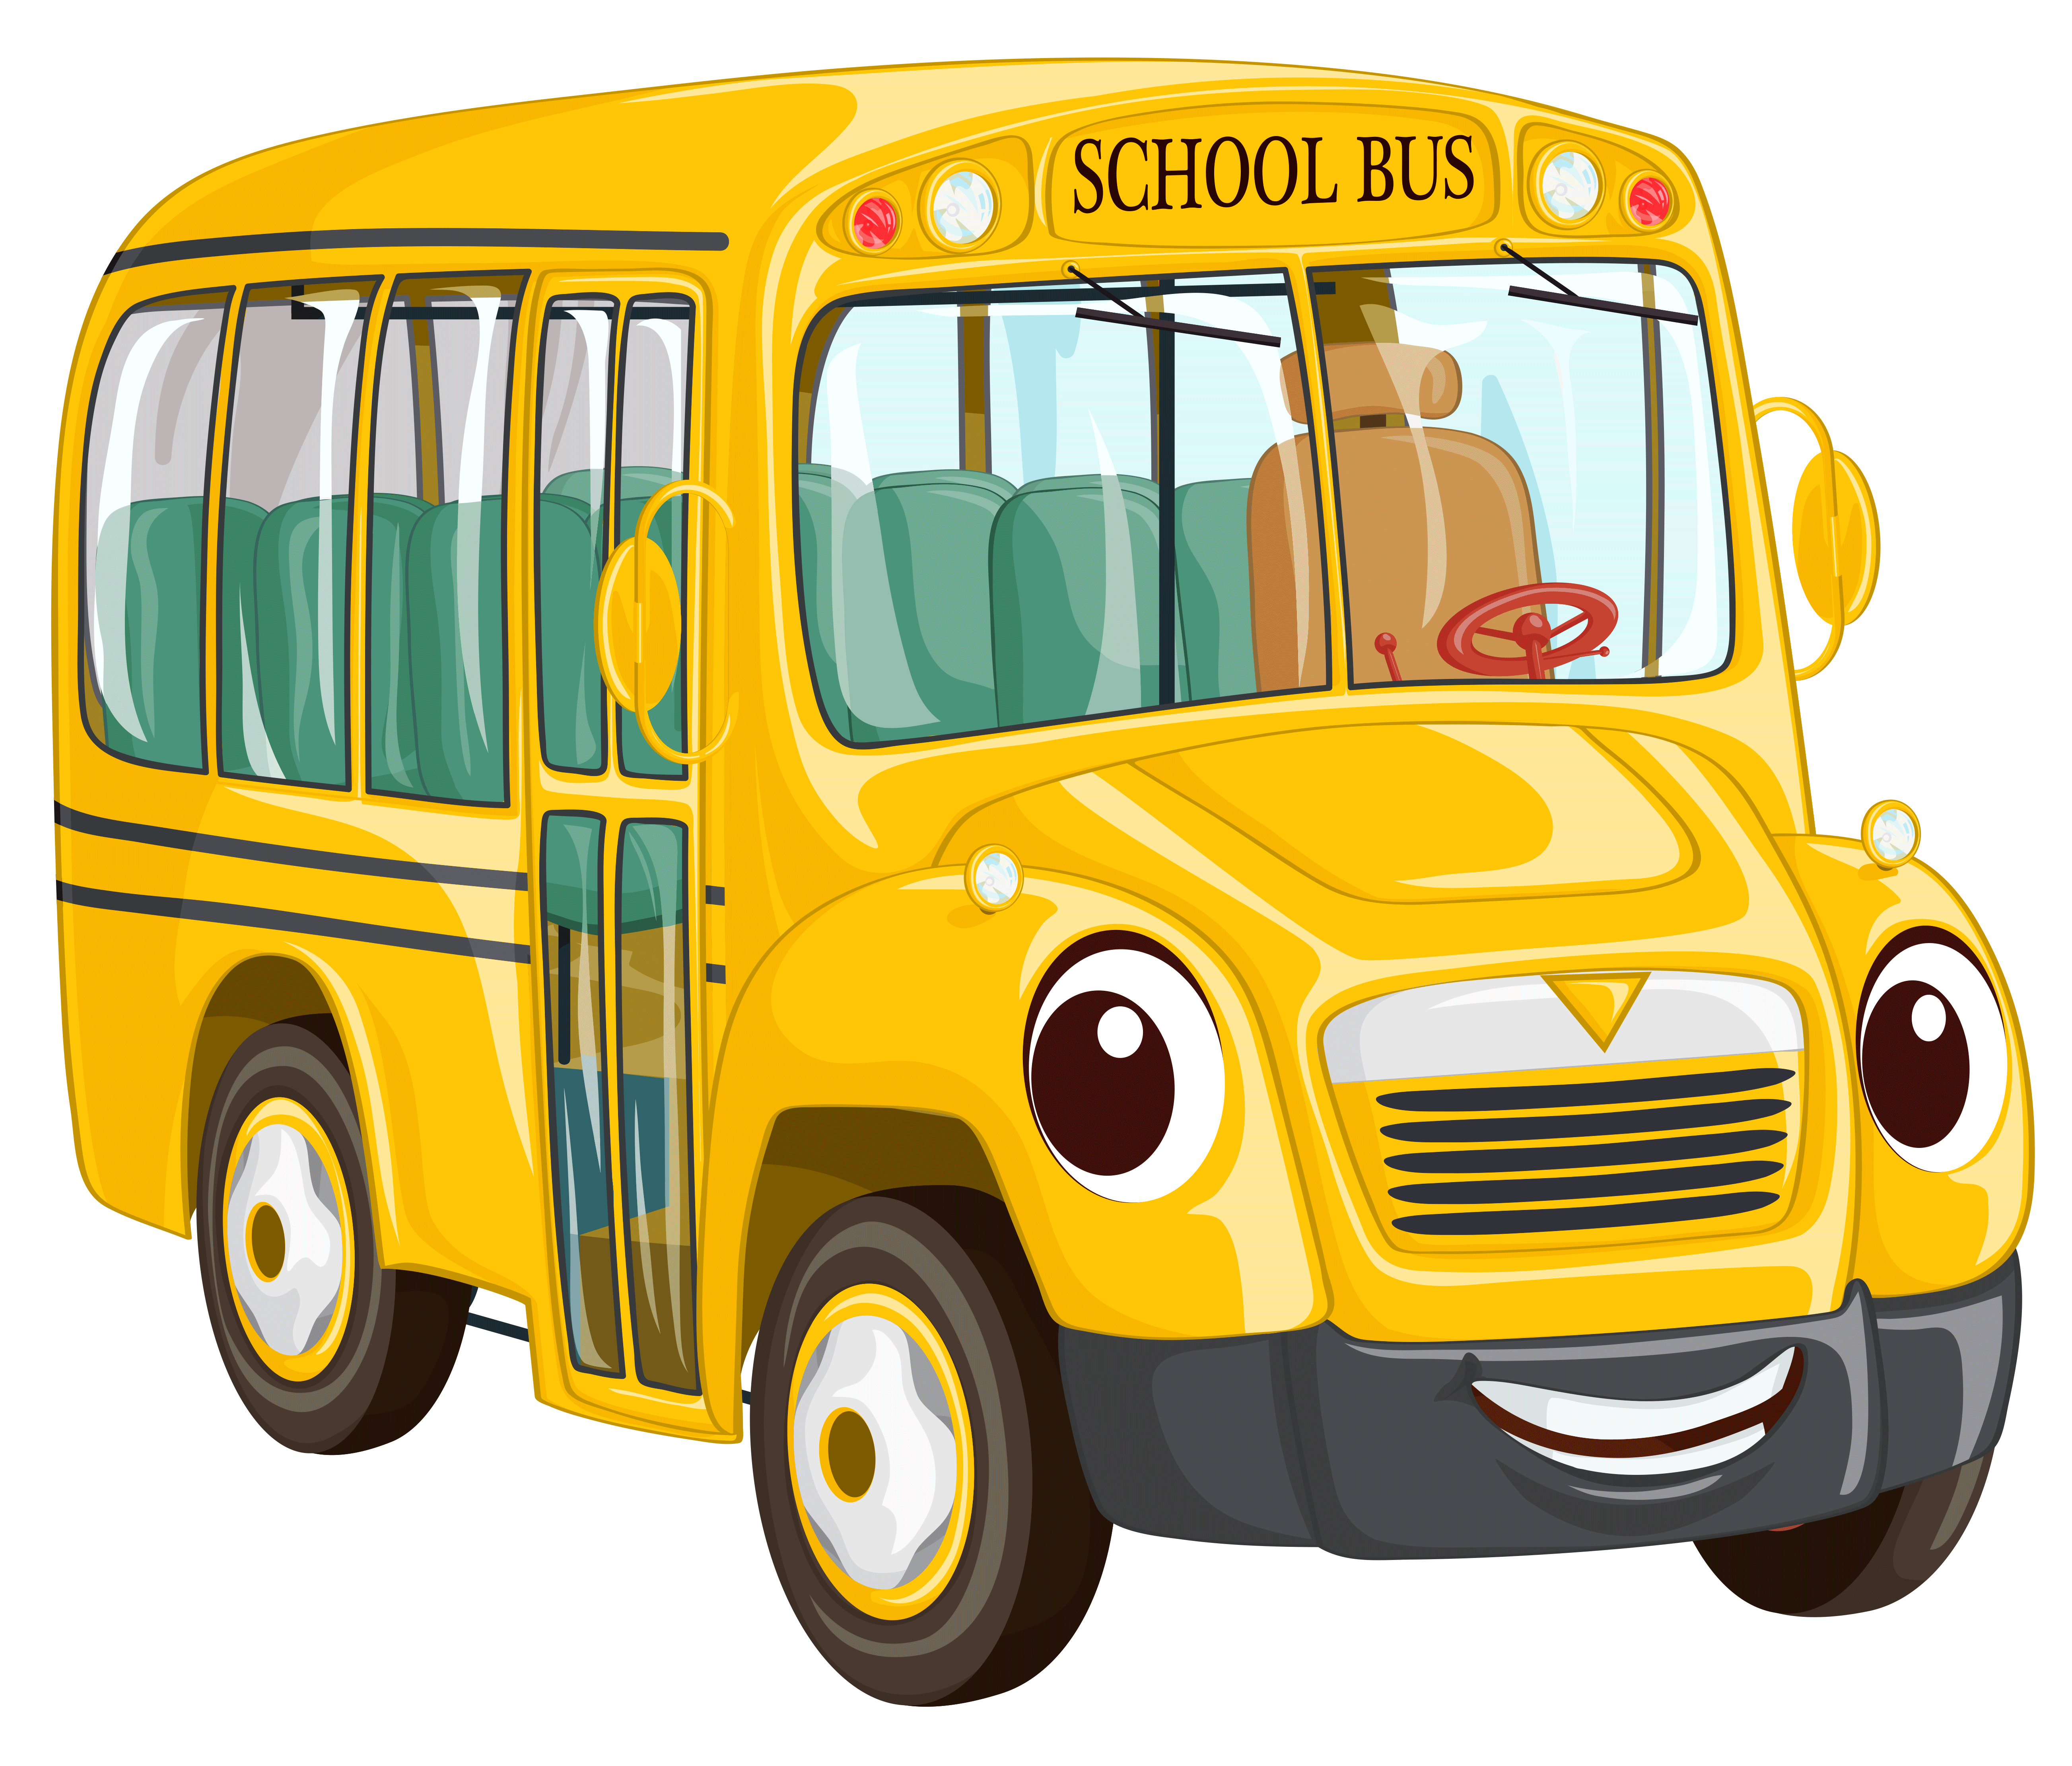 Cartoon Bus PNG Clipart - Download free Car images in PNG